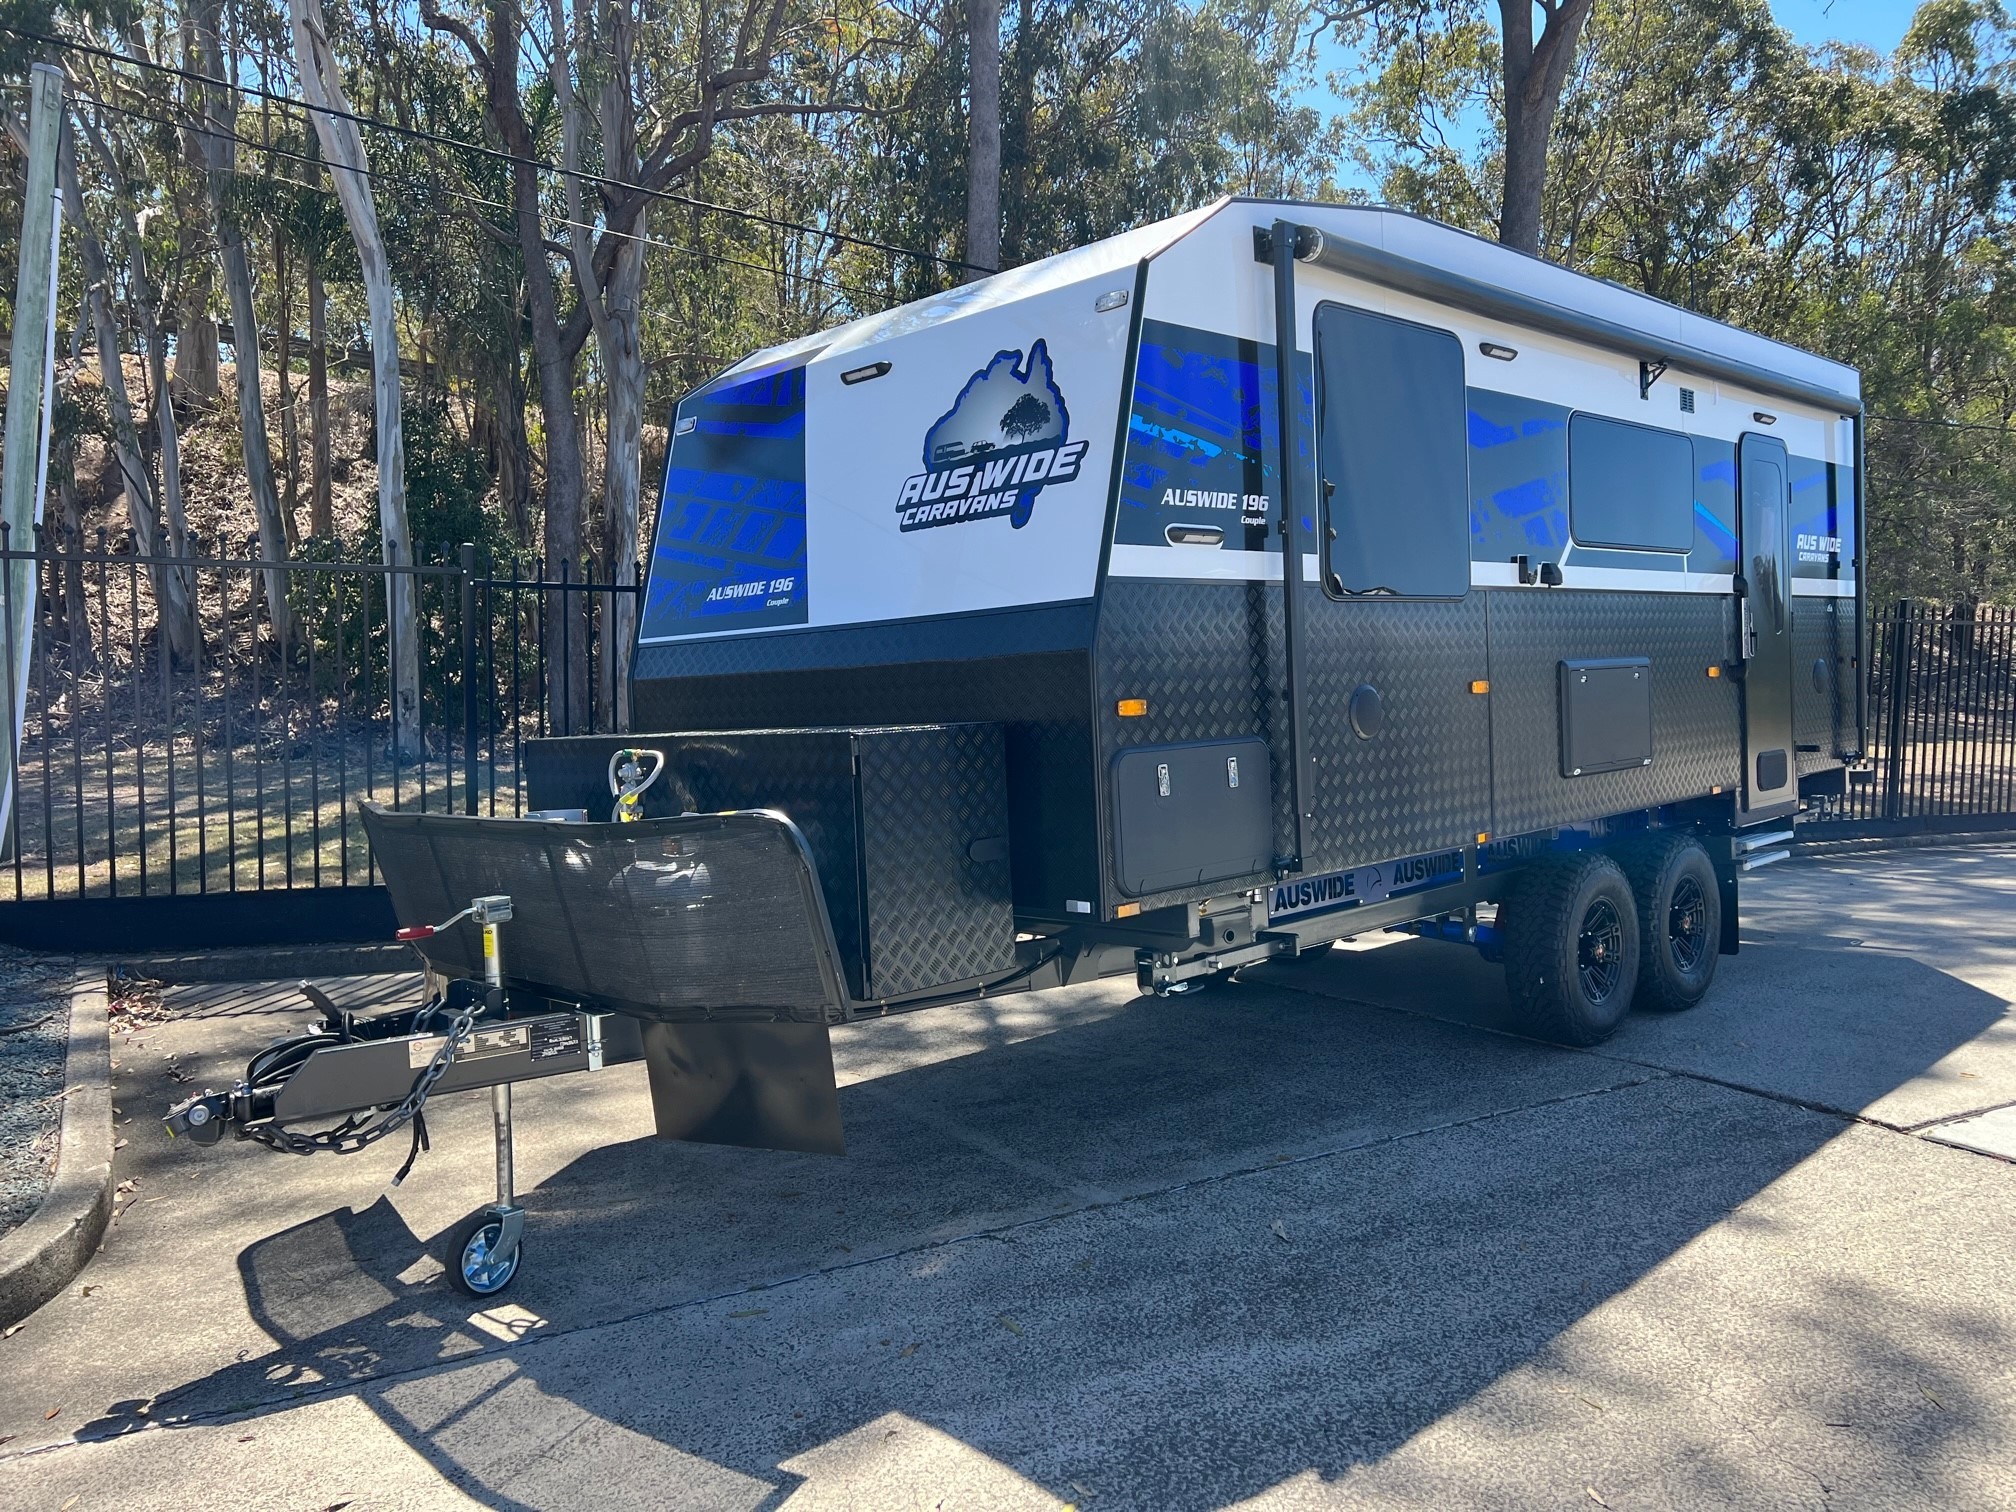 2024 Auswide 20ft6 Offroad Couples Van With Truss Chassis